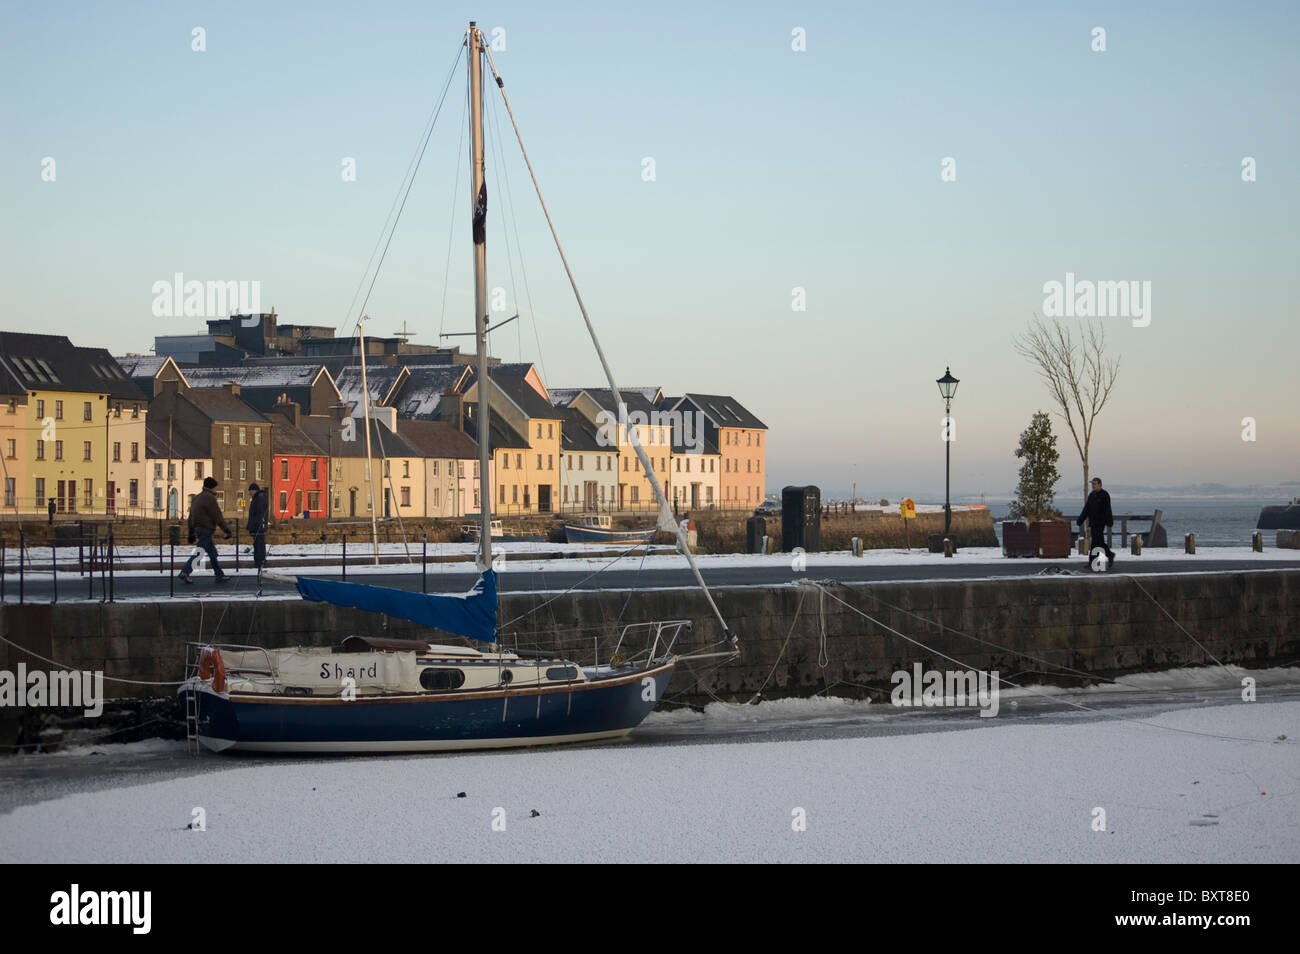 Claddagh Quay, Galway am Weihnachtstag, 2010 Stockfoto